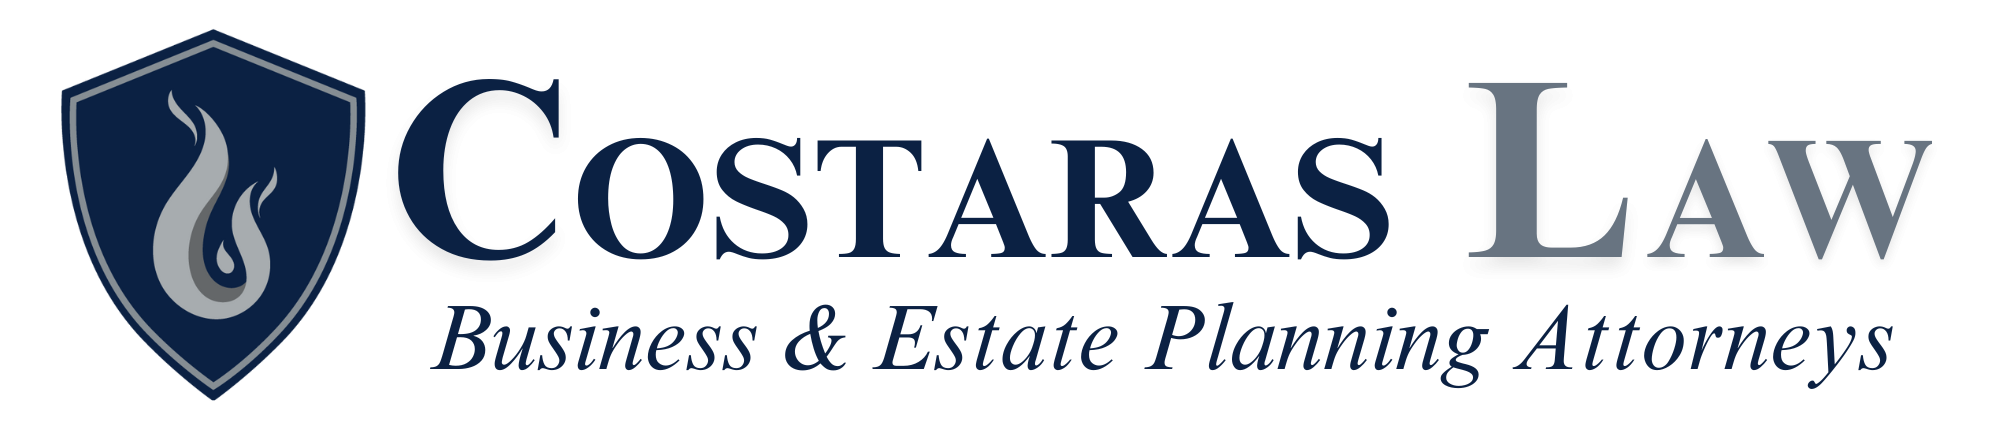 Costaras Law transparent logo displaying a shield with a flame emblem, accompanied by the text "Costaras Law - Business & Estate Planning Attorneys."